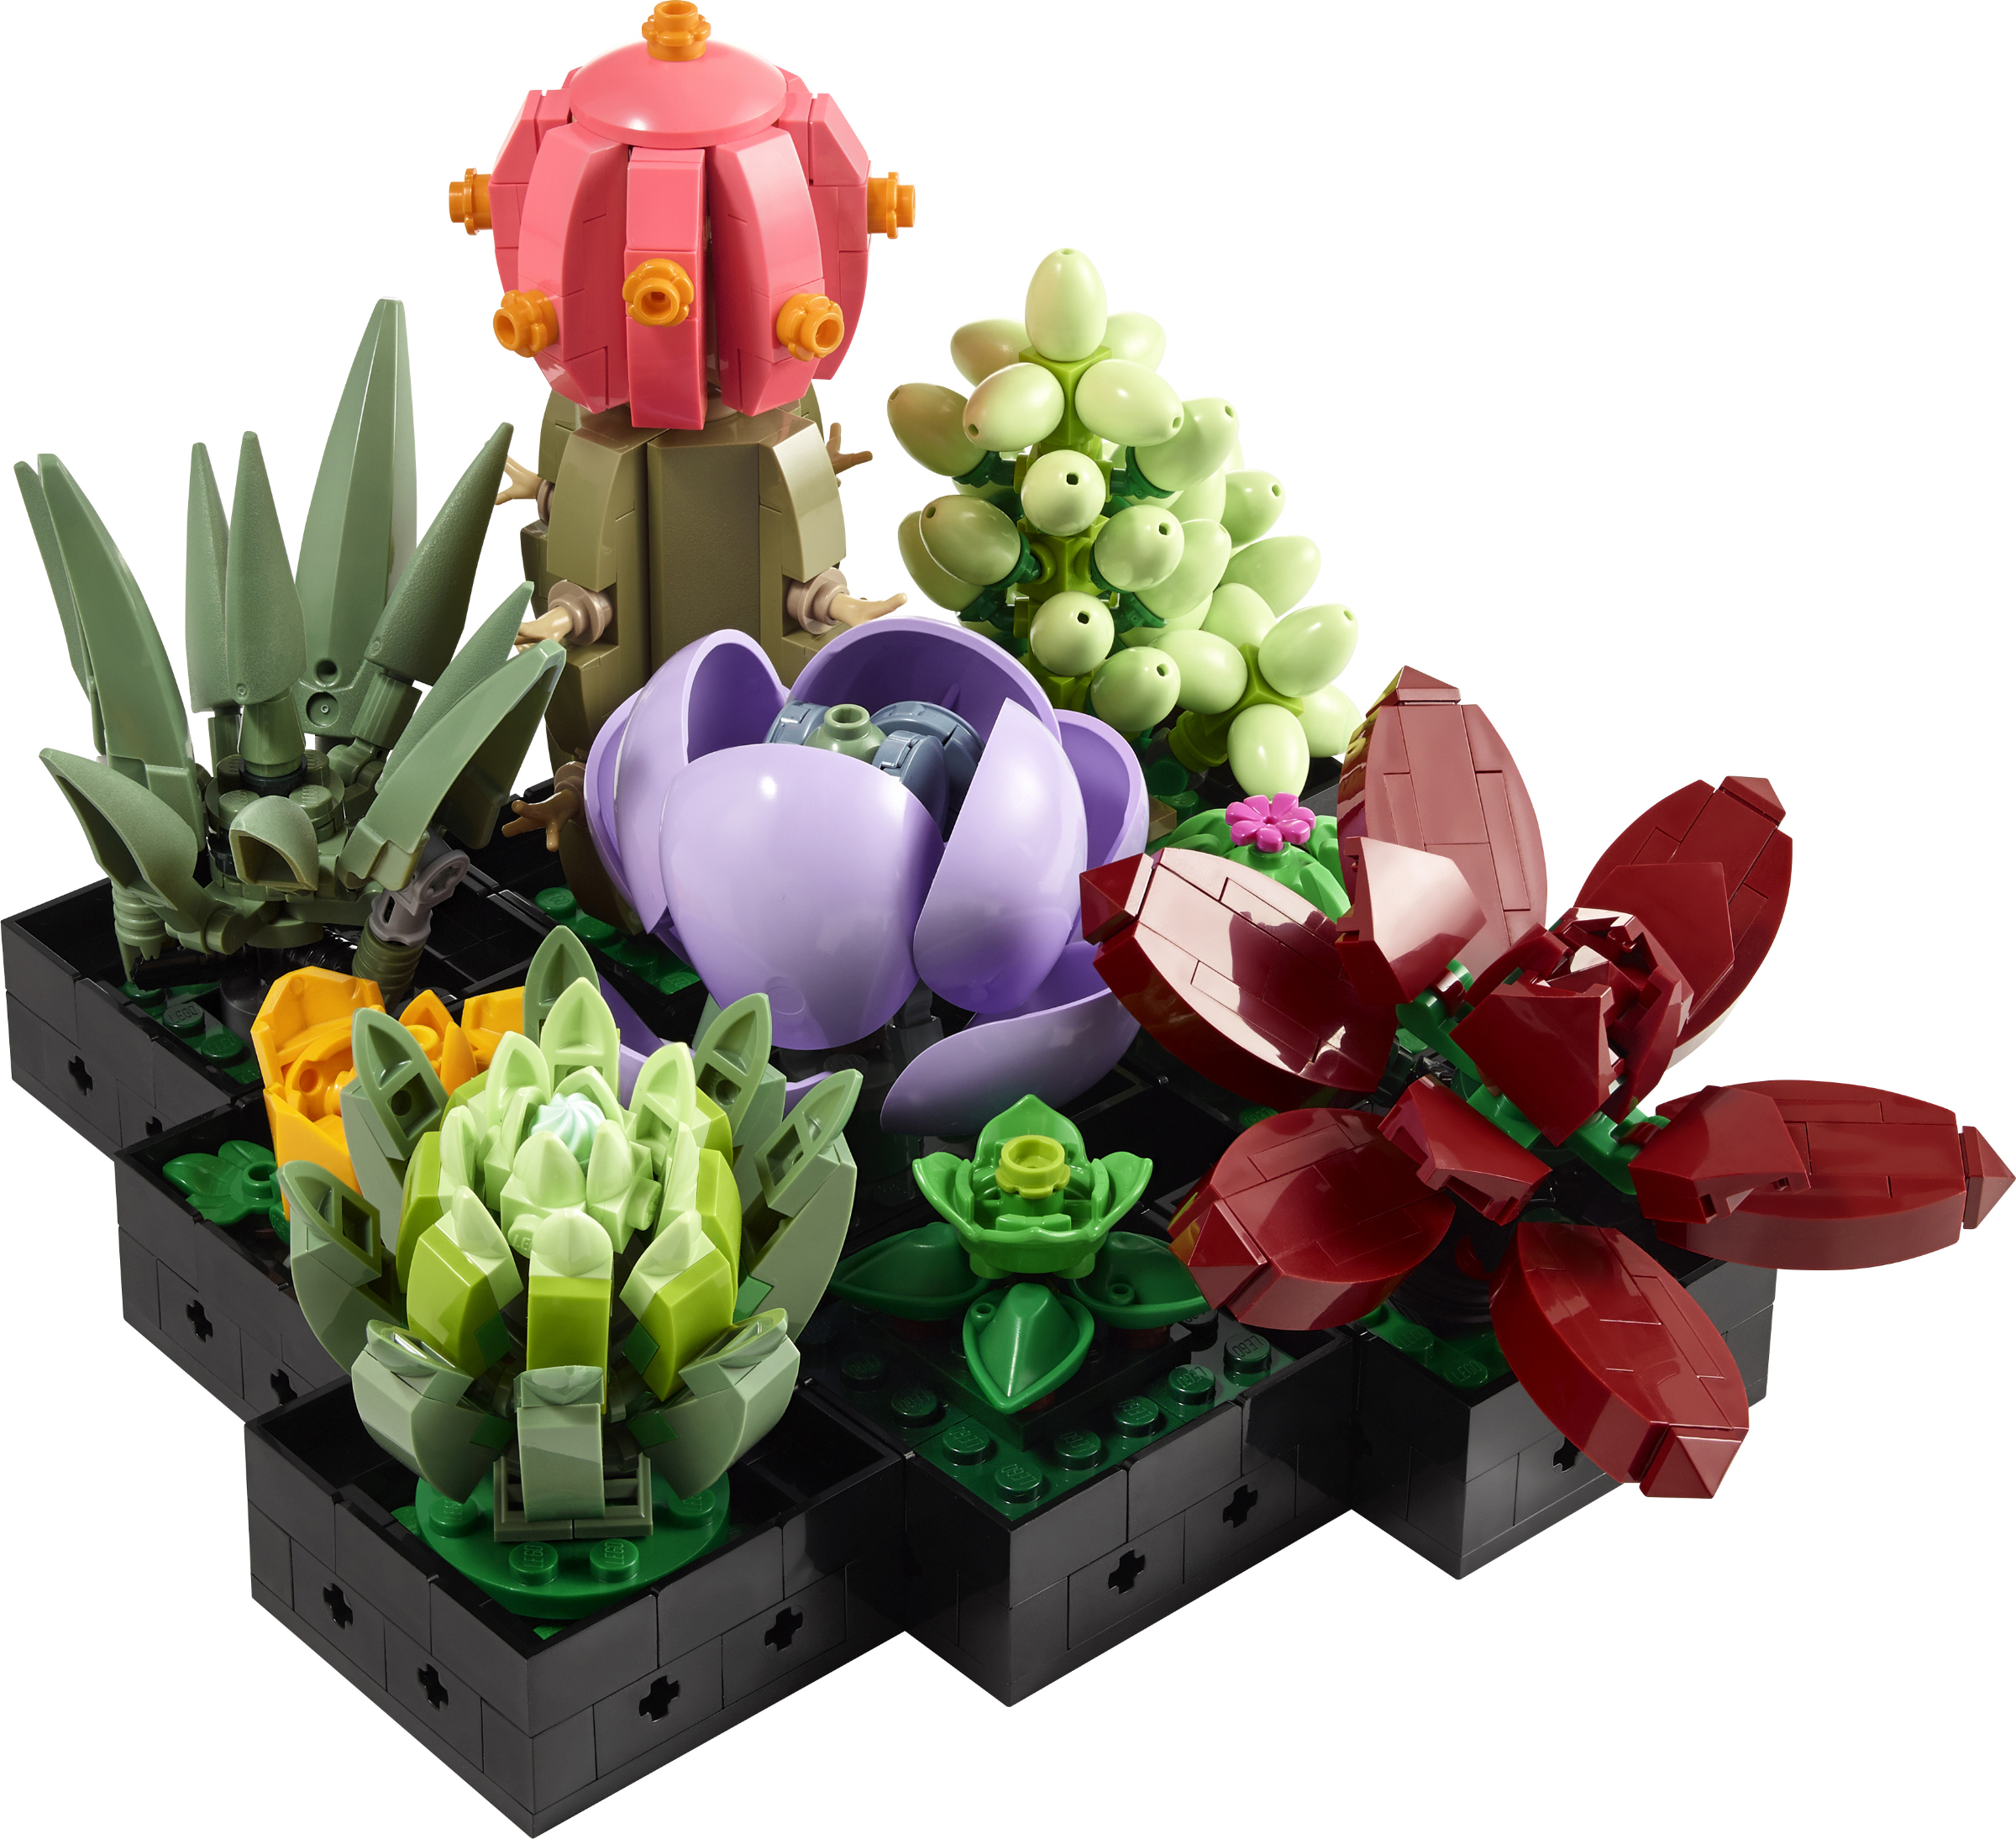 LEGO Plants from Plants Set 40435